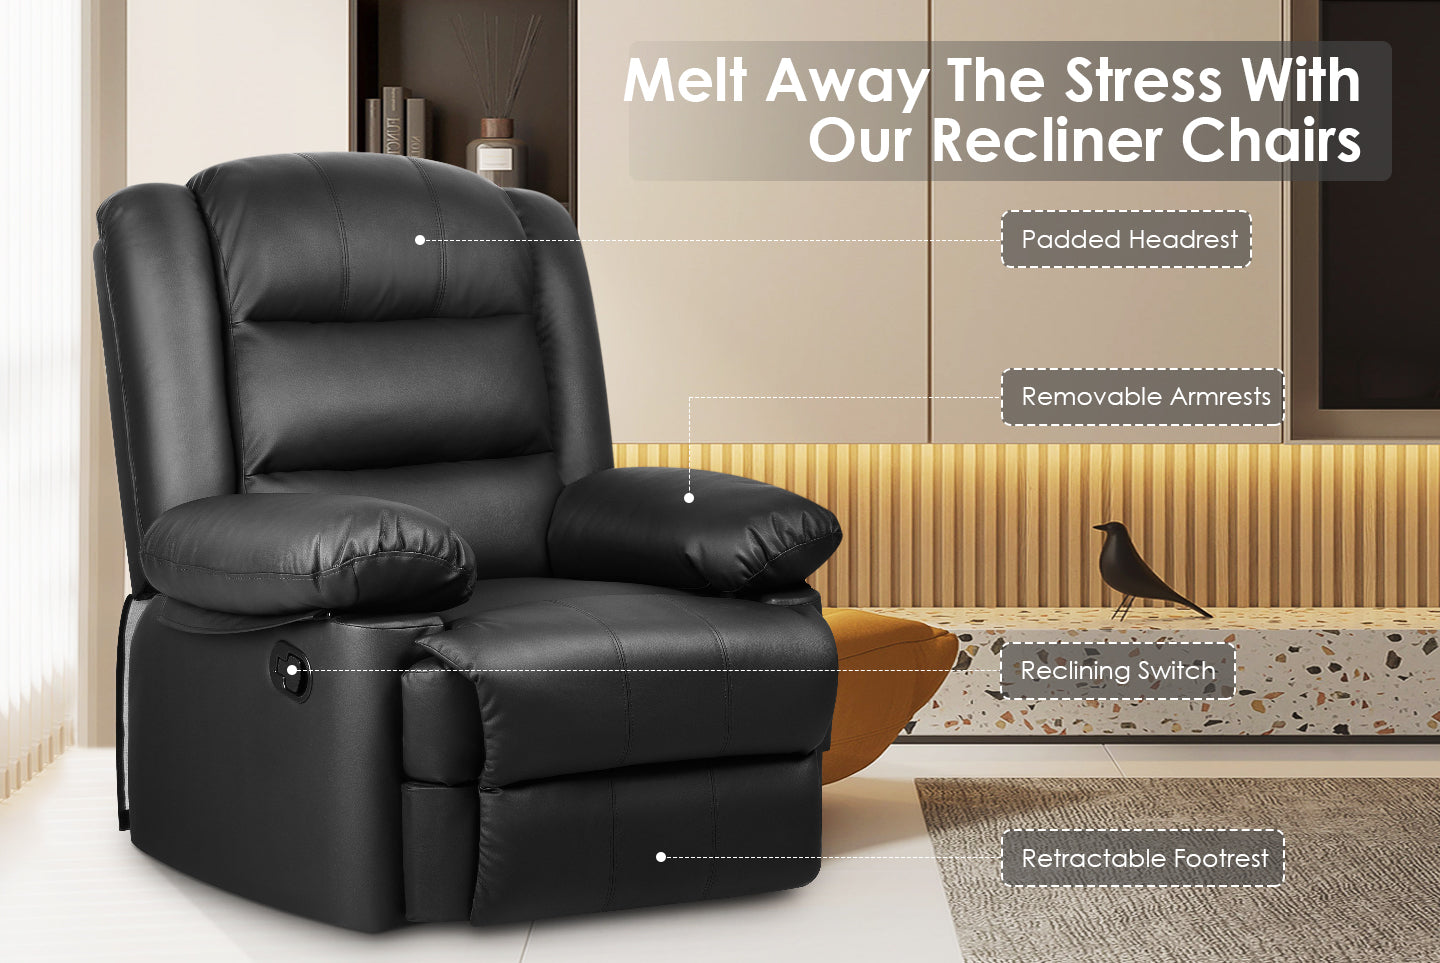 Armchair PU Leather Recliner Chair 110°-160° Manual Reclining Sofa with Padded Backrest Seat Retractable Footrest